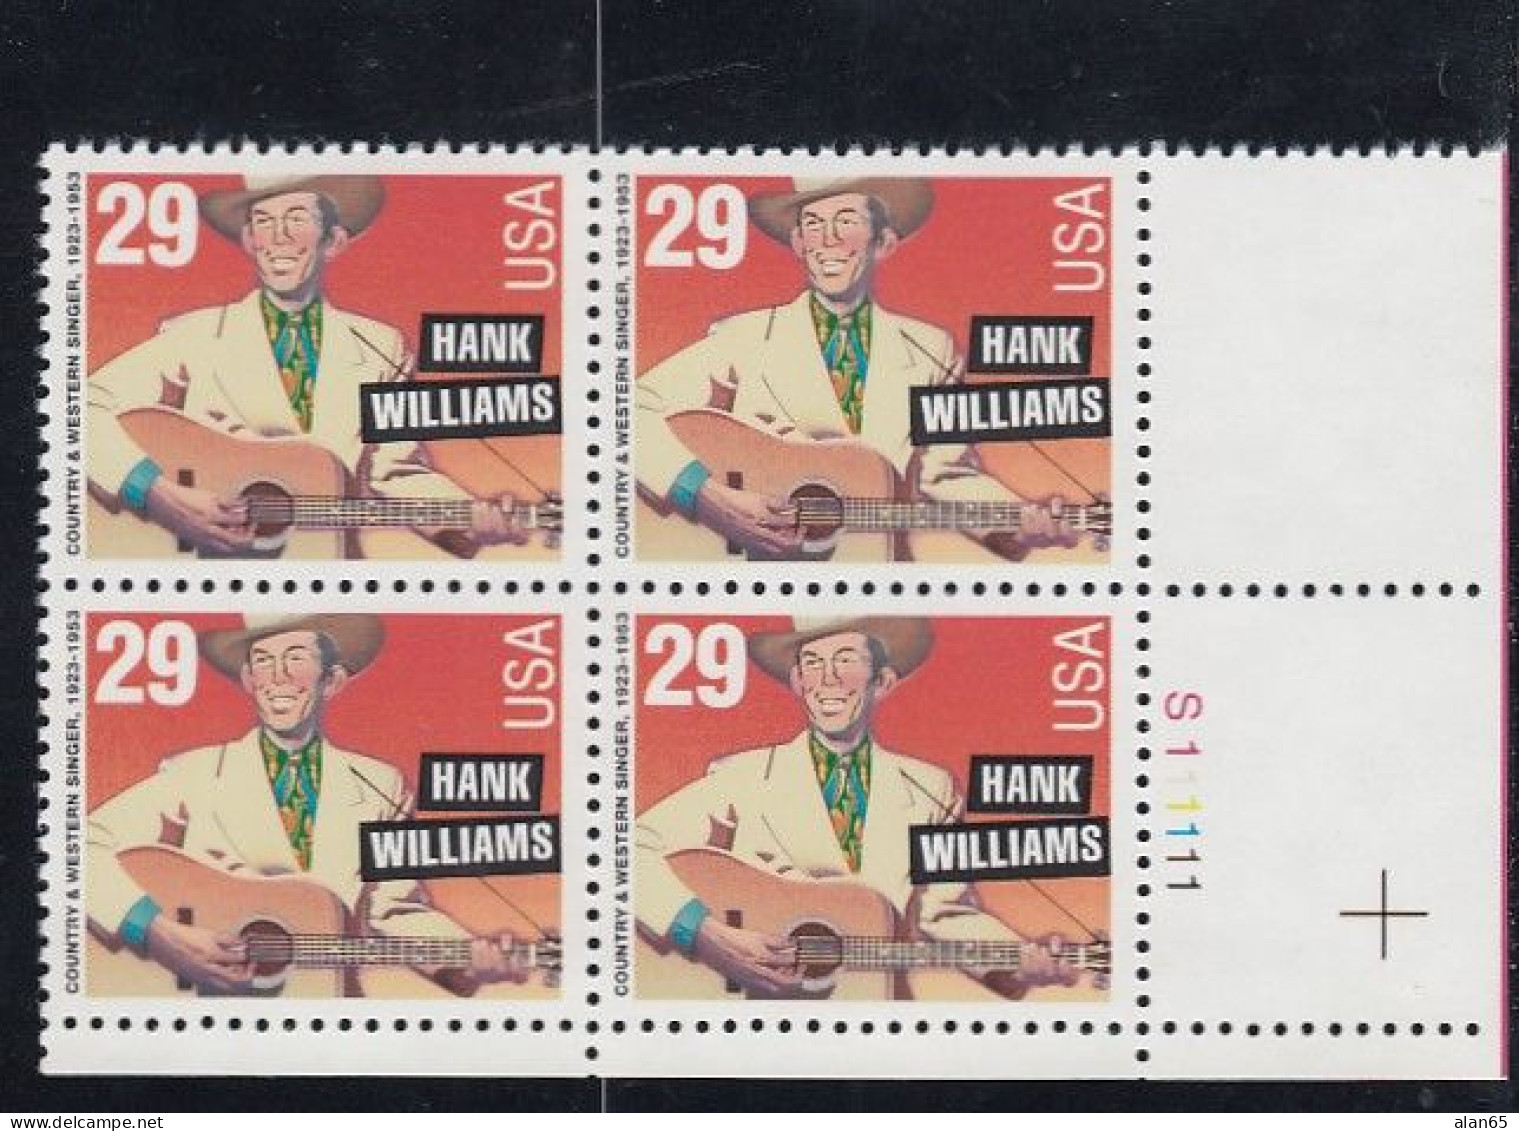 Sc#2723, Hank Williams Country Music Singer Composer, Musical Series, 29-cent Plate Number Block Of 4 MNH Stamps - Numéros De Planches